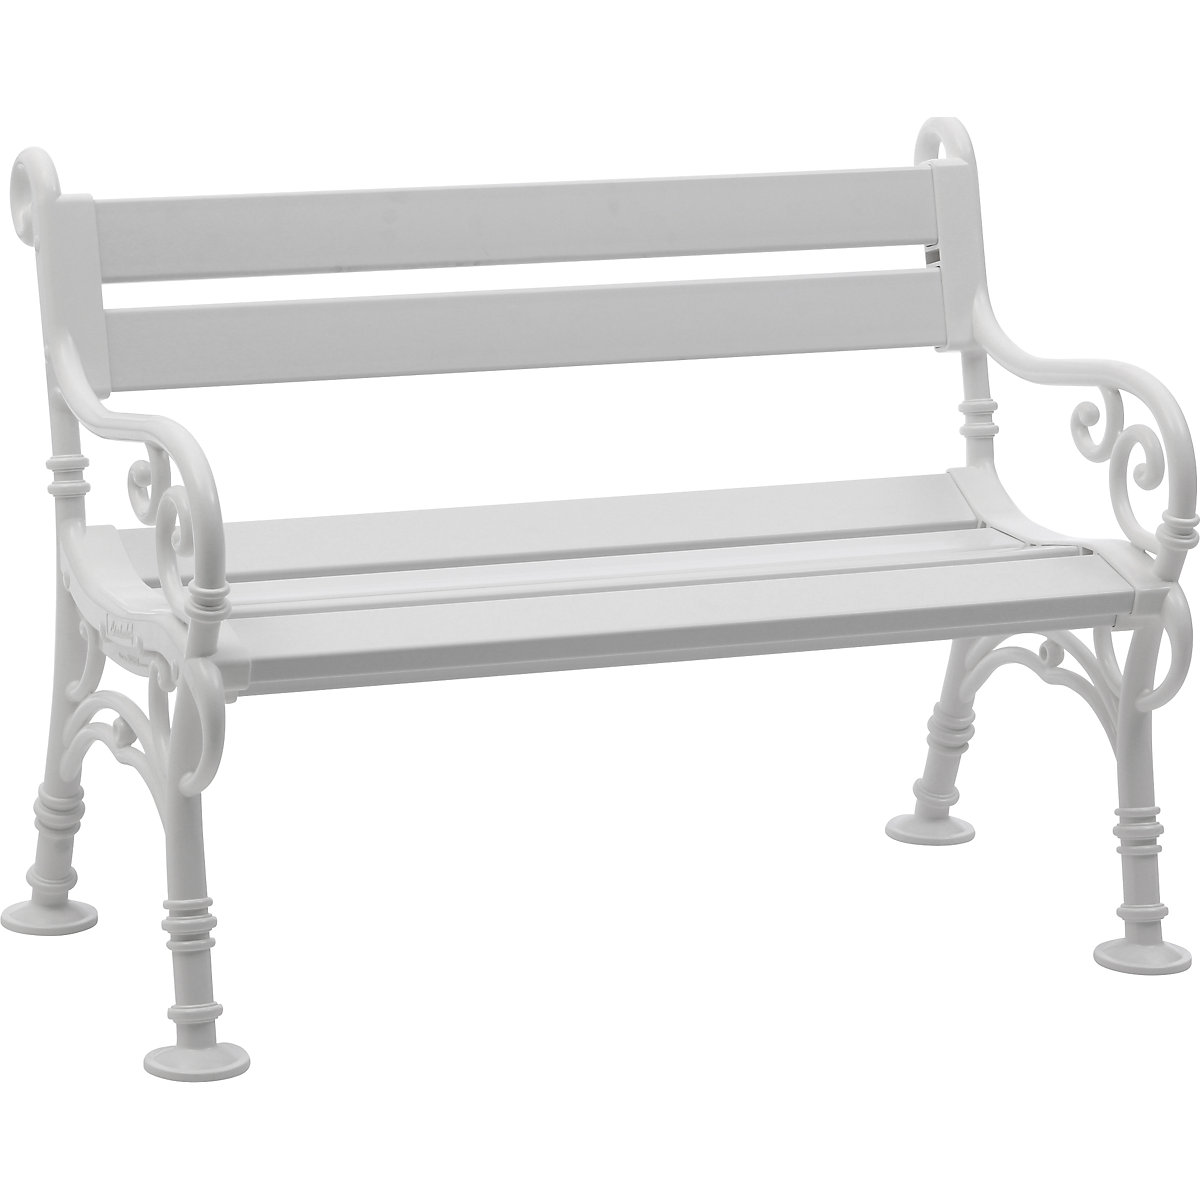 Seating bench, classic, HxD 850 x 600 mm, 2 seater-6